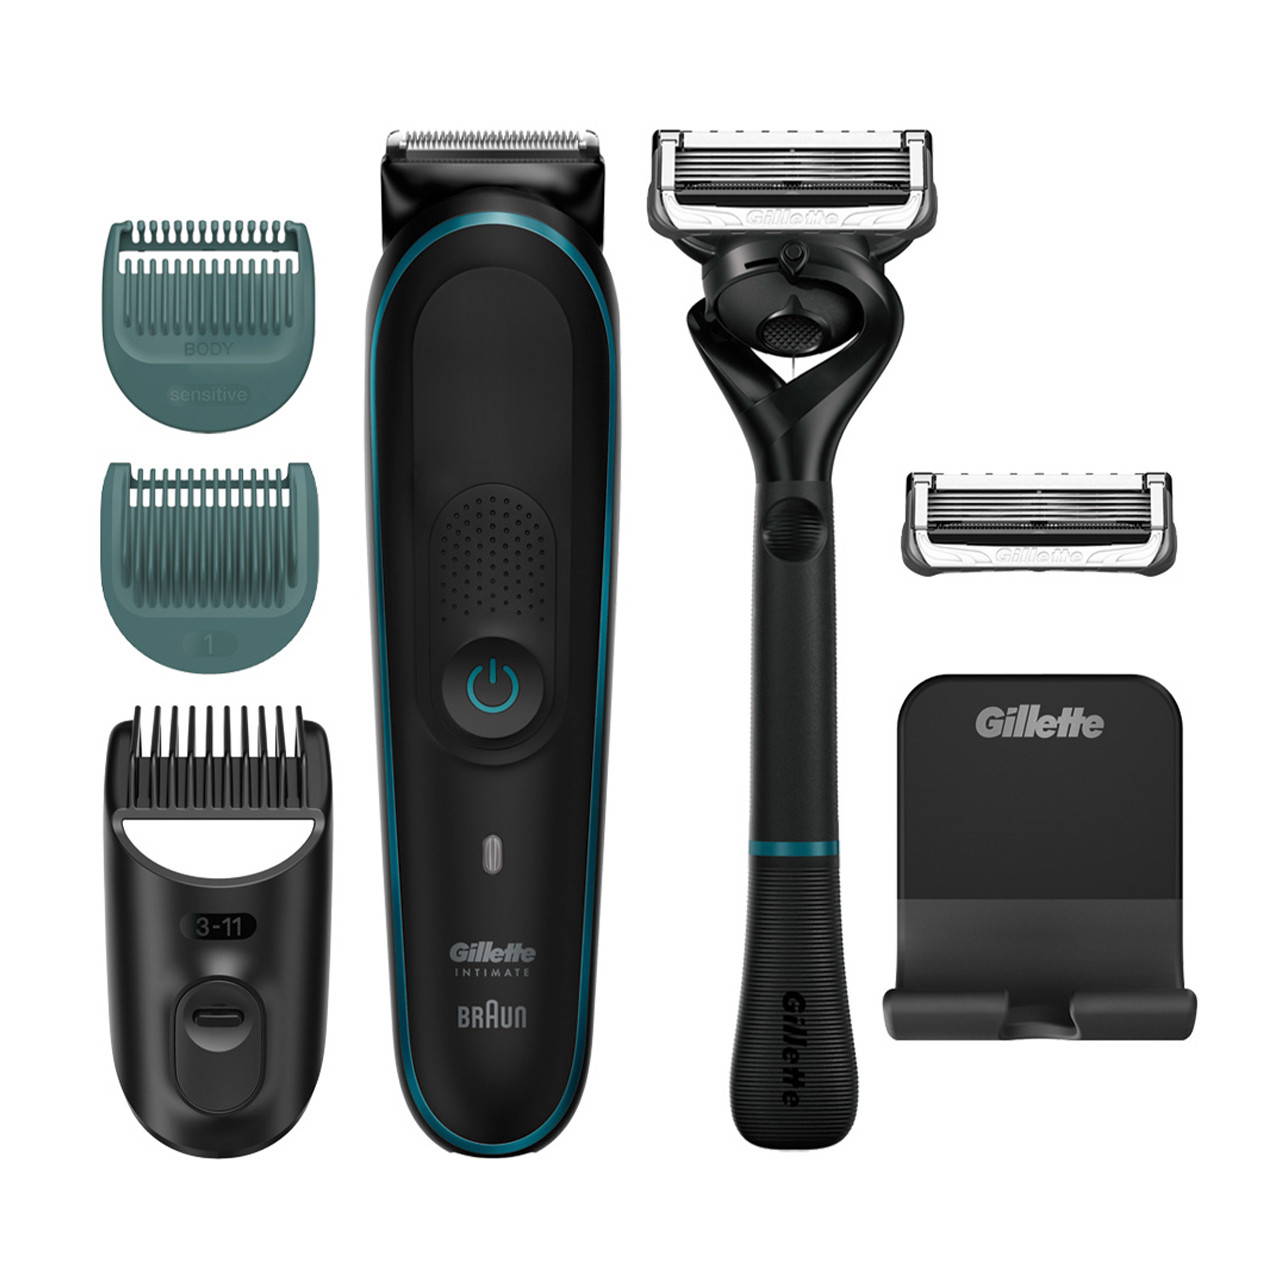 trimmer and shaving kit components